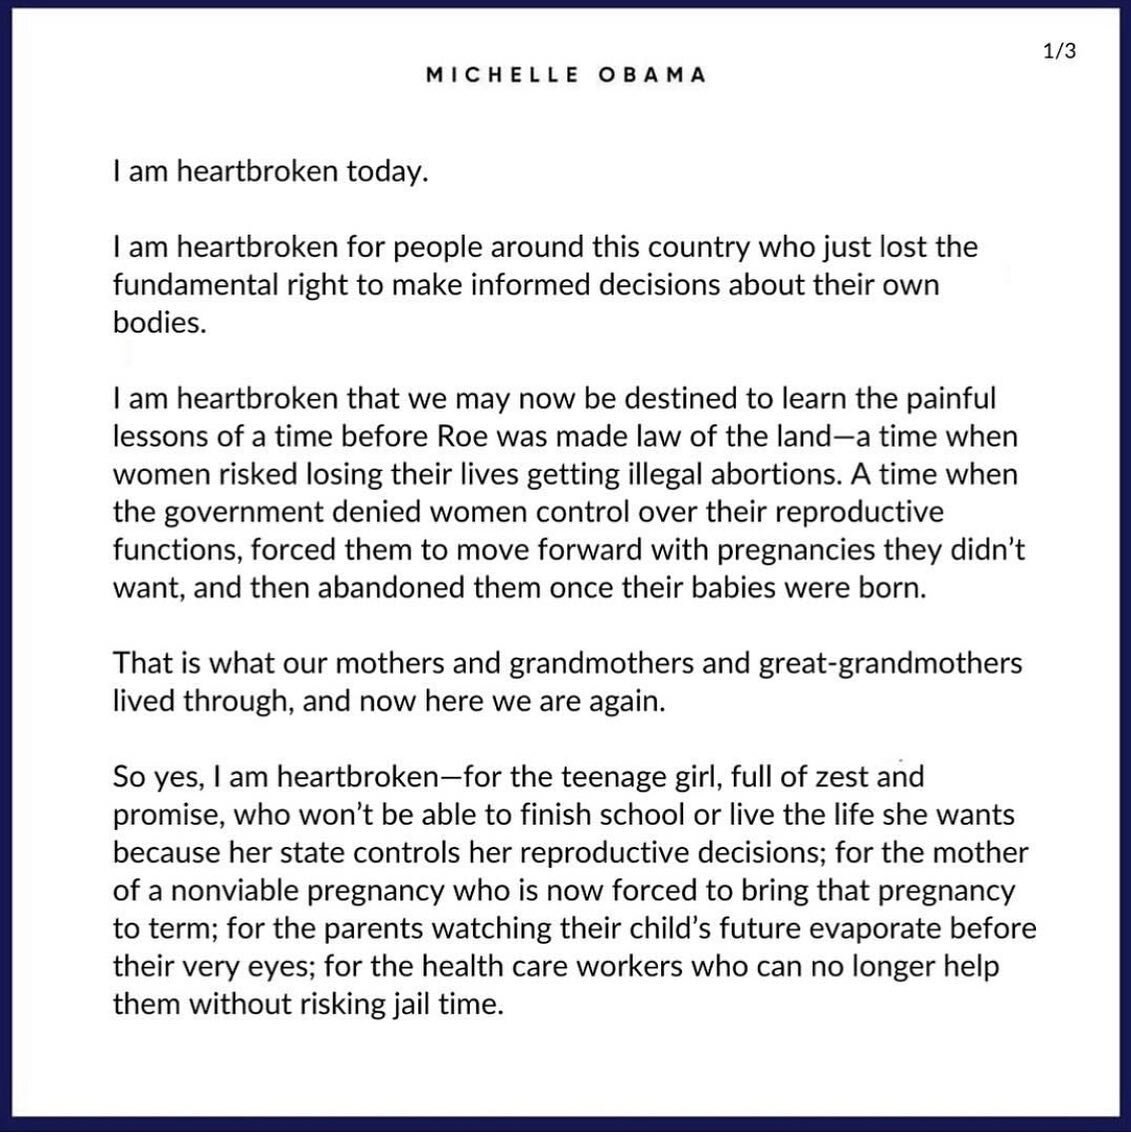 This post from Michelle Obama&rsquo;s is a guiding light for hope. 
Today I feel the pain for myself and others who are again told that their bodies aren&rsquo;t their own, that their rights don&rsquo;t matter, that their suffering doesn&rsquo;t matt